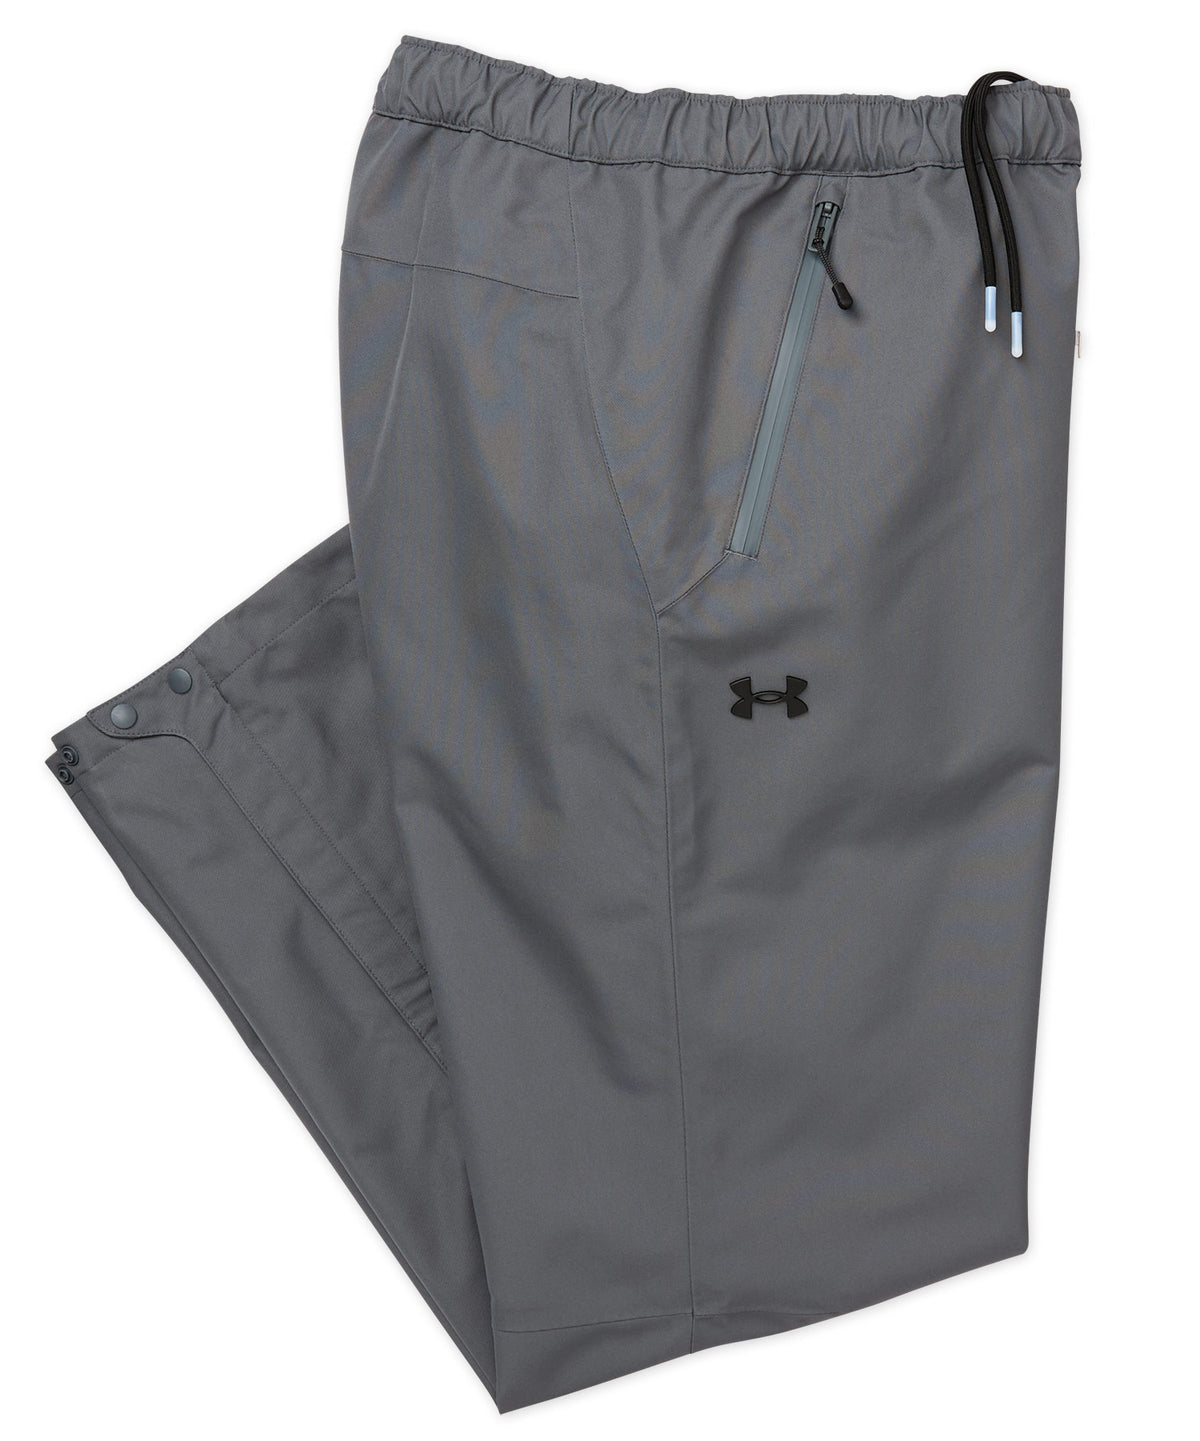 Under Armour Stormproof Lined Rain Pants, Big & Tall